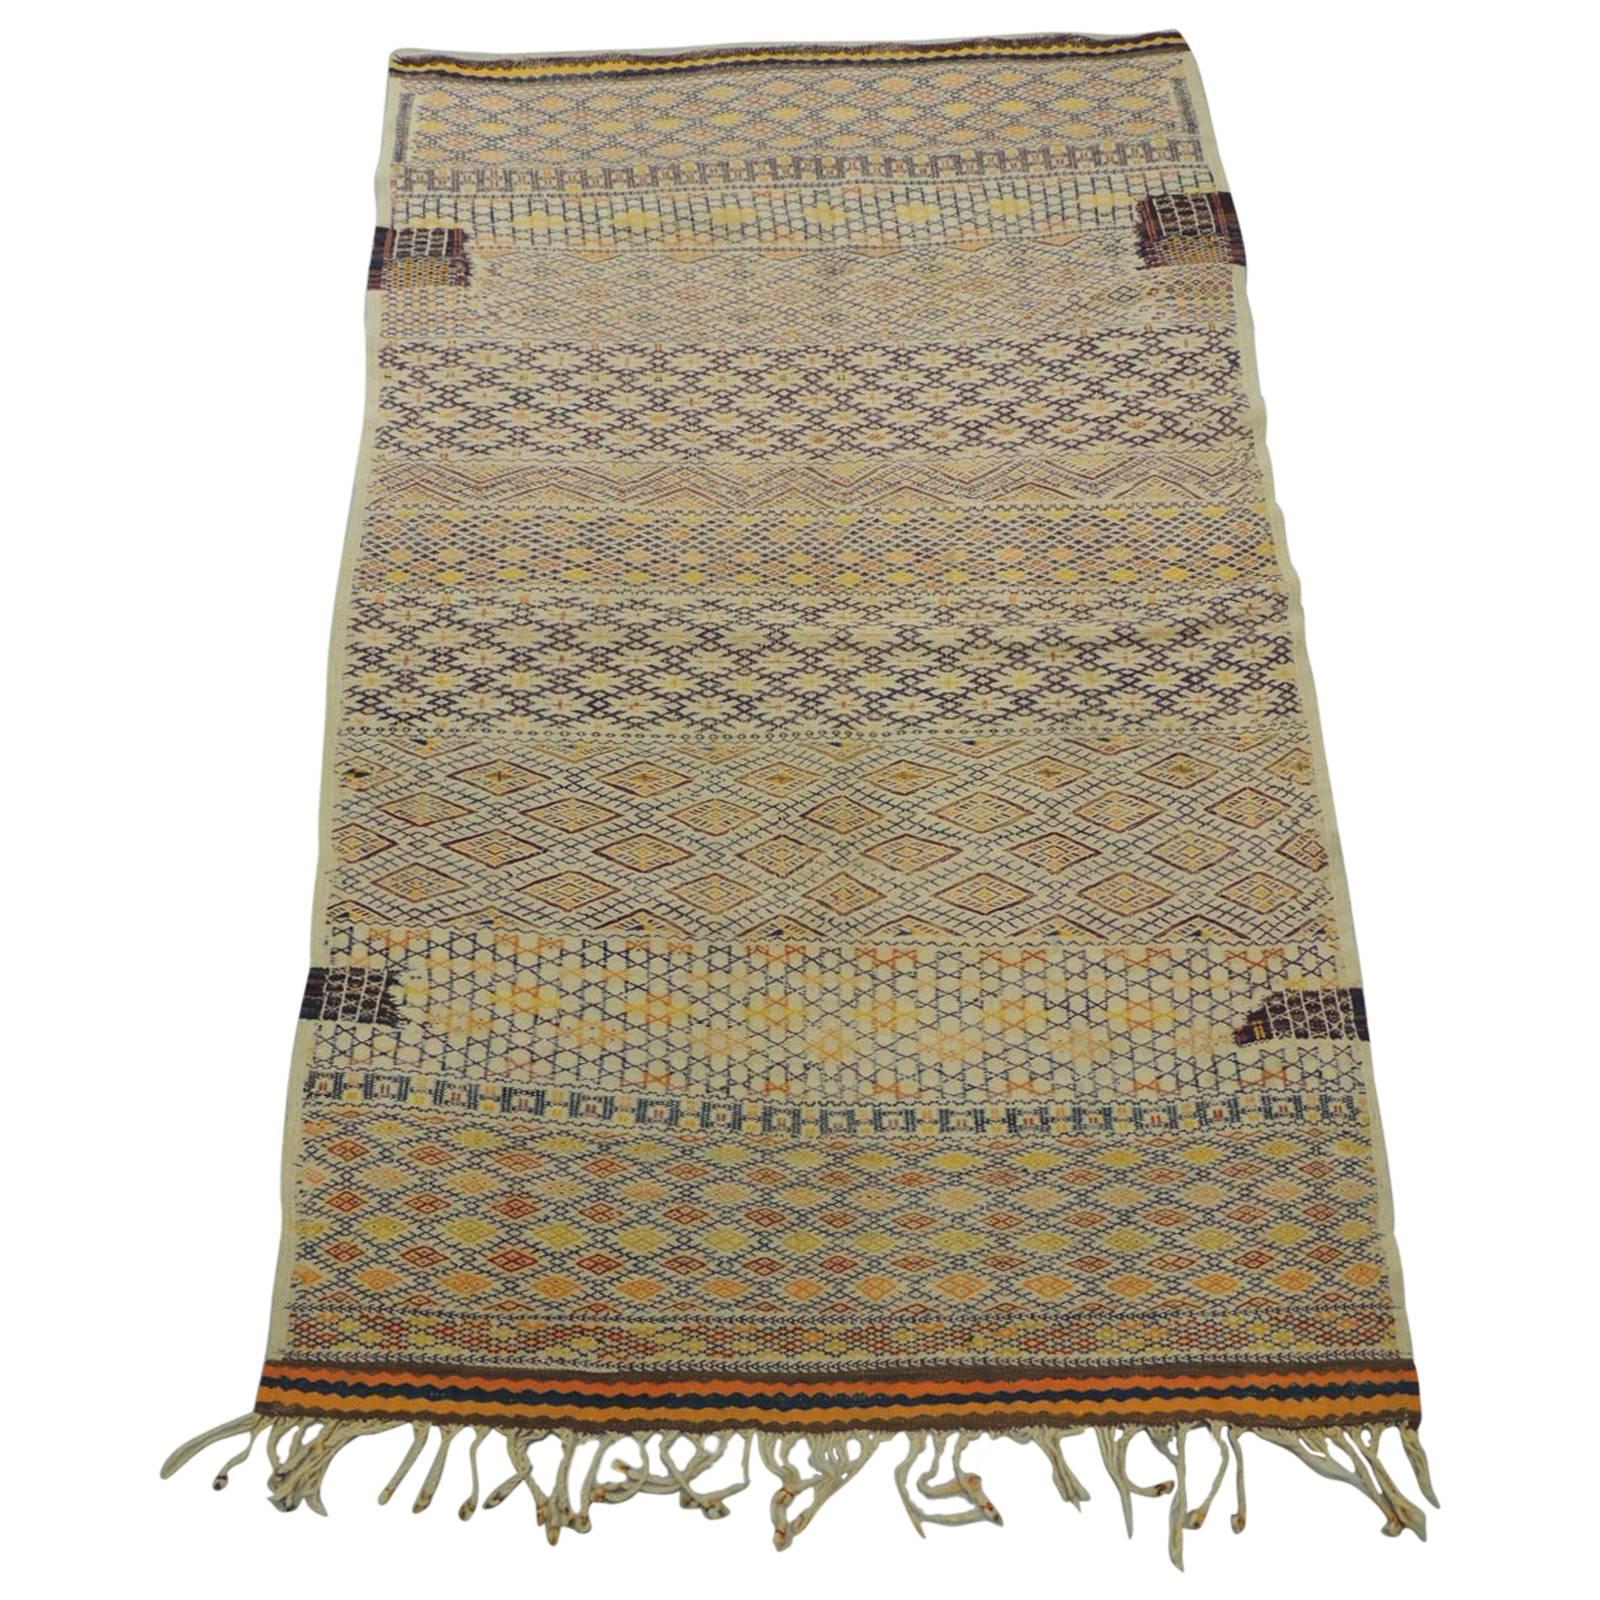 Vintage Yellow Moroccan Wall Hanging Woven Tapestry